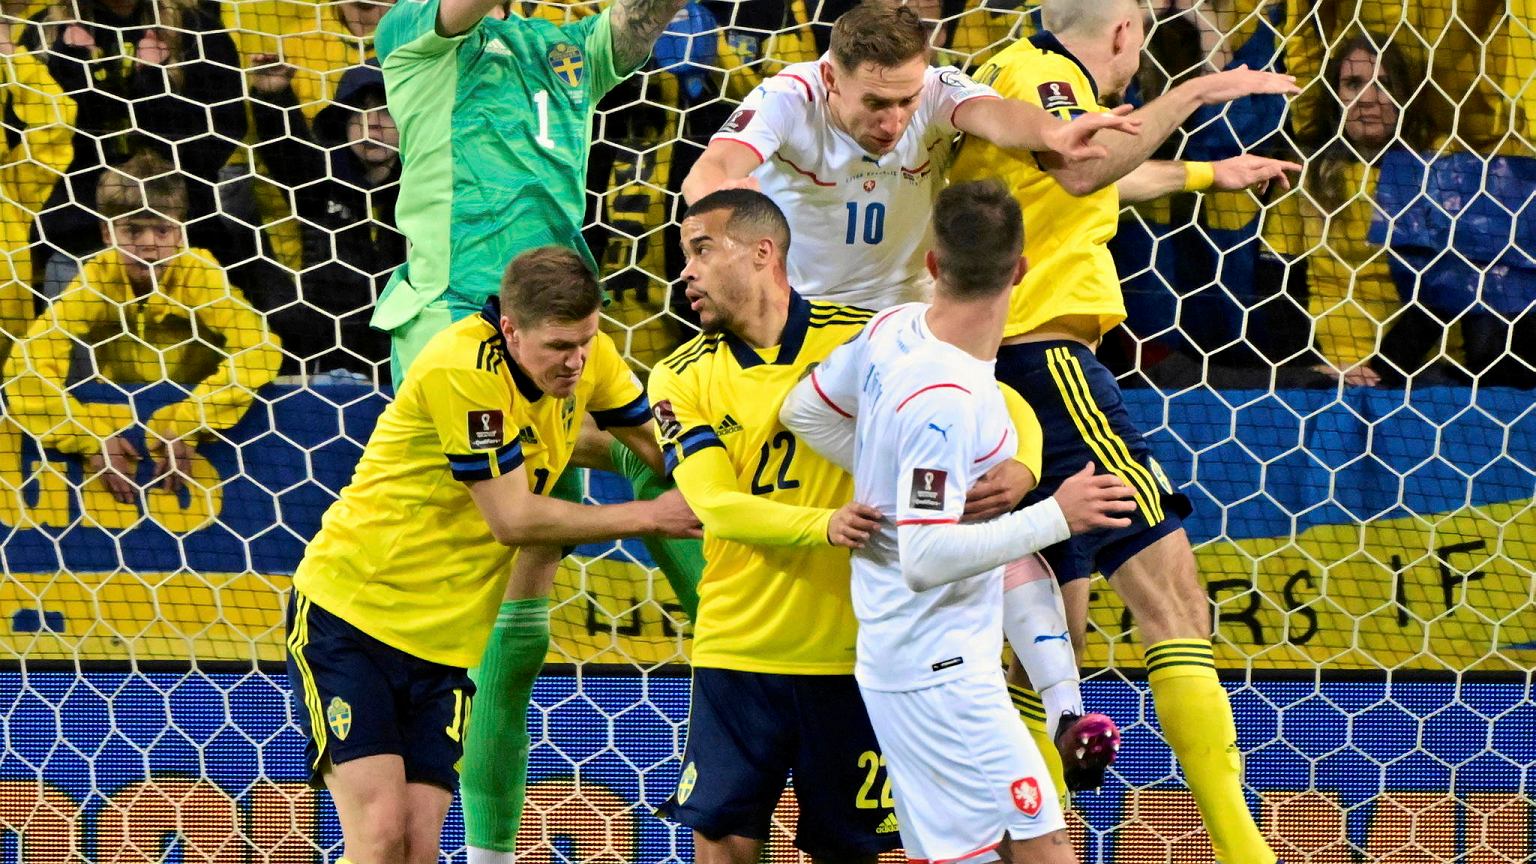 "Unbearable".  Sweden is amazing after the semi-finals.  Football has always been bad taste